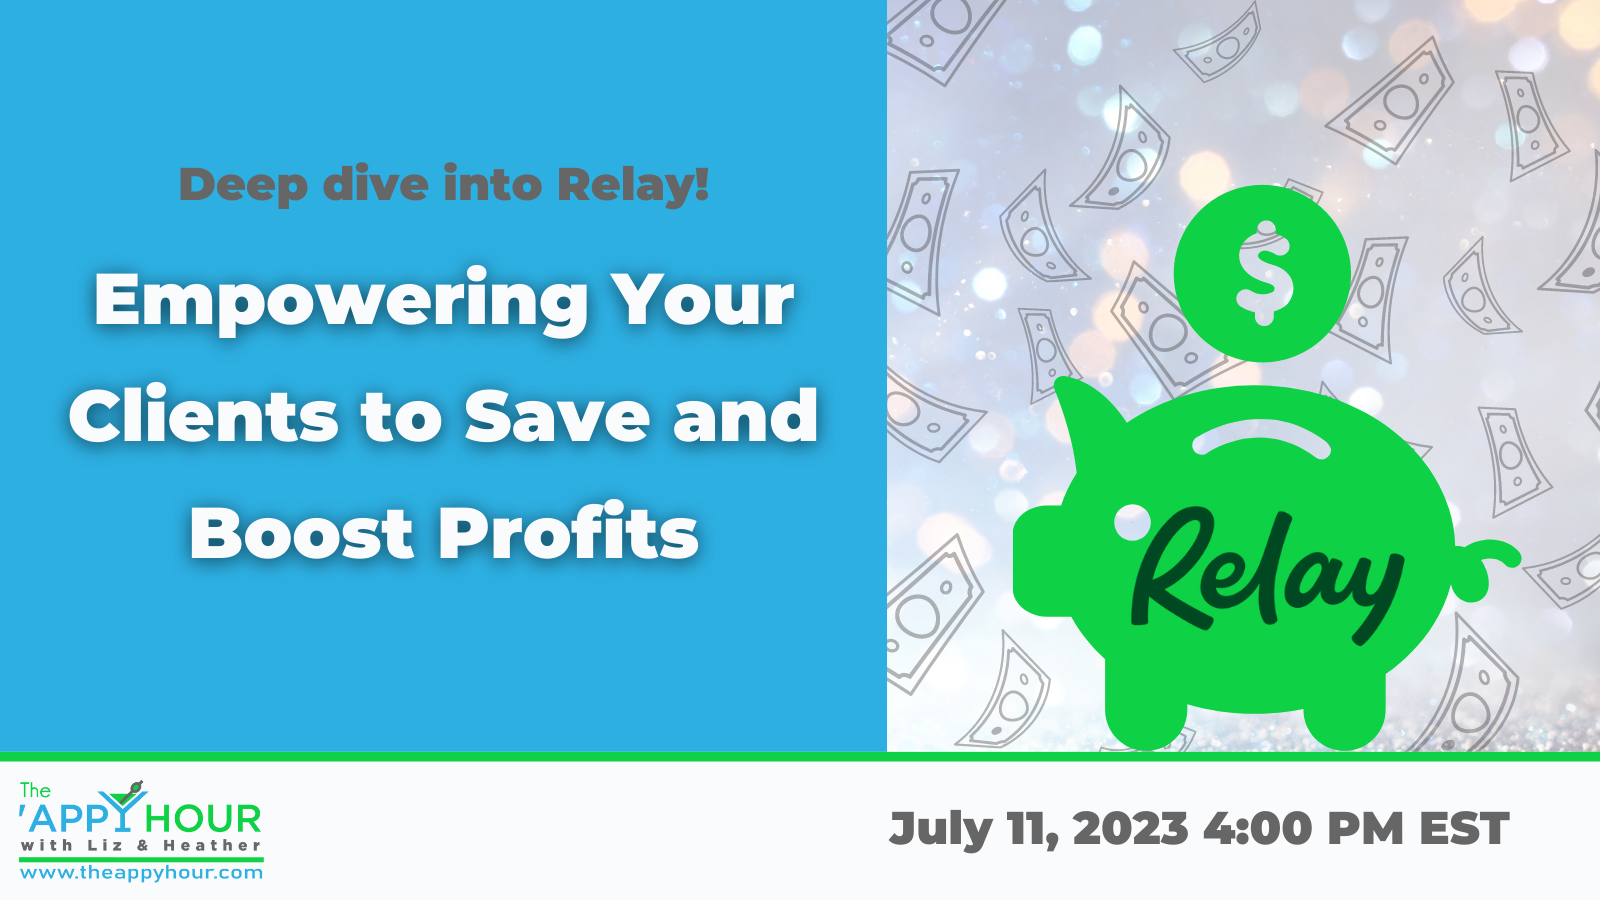 Empowering Your Clients to Save and Boost Profits